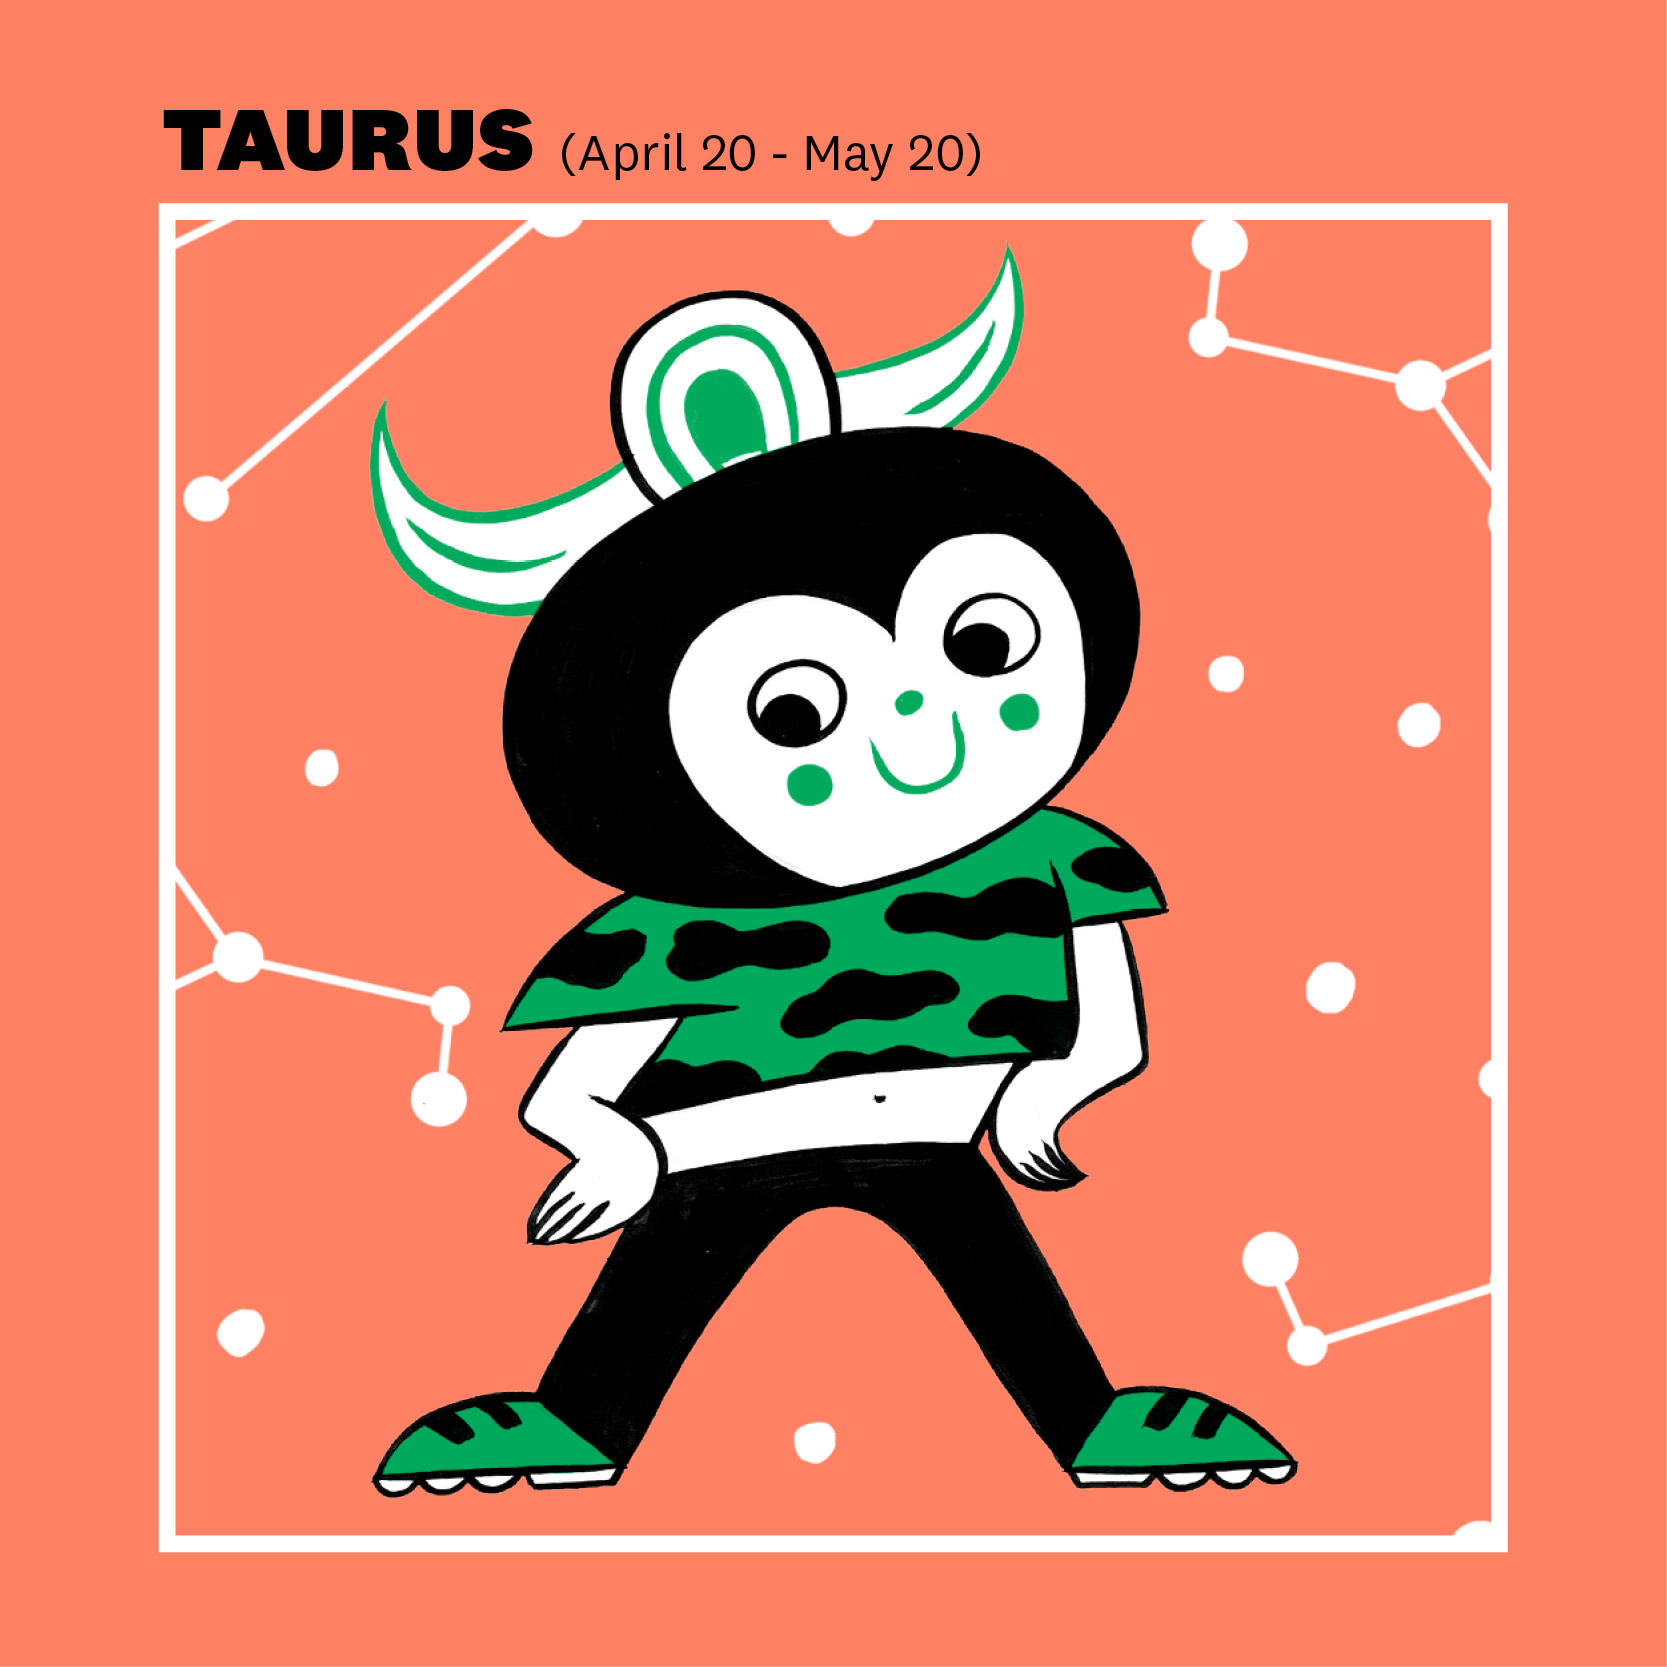 Are taurus touchy feely?